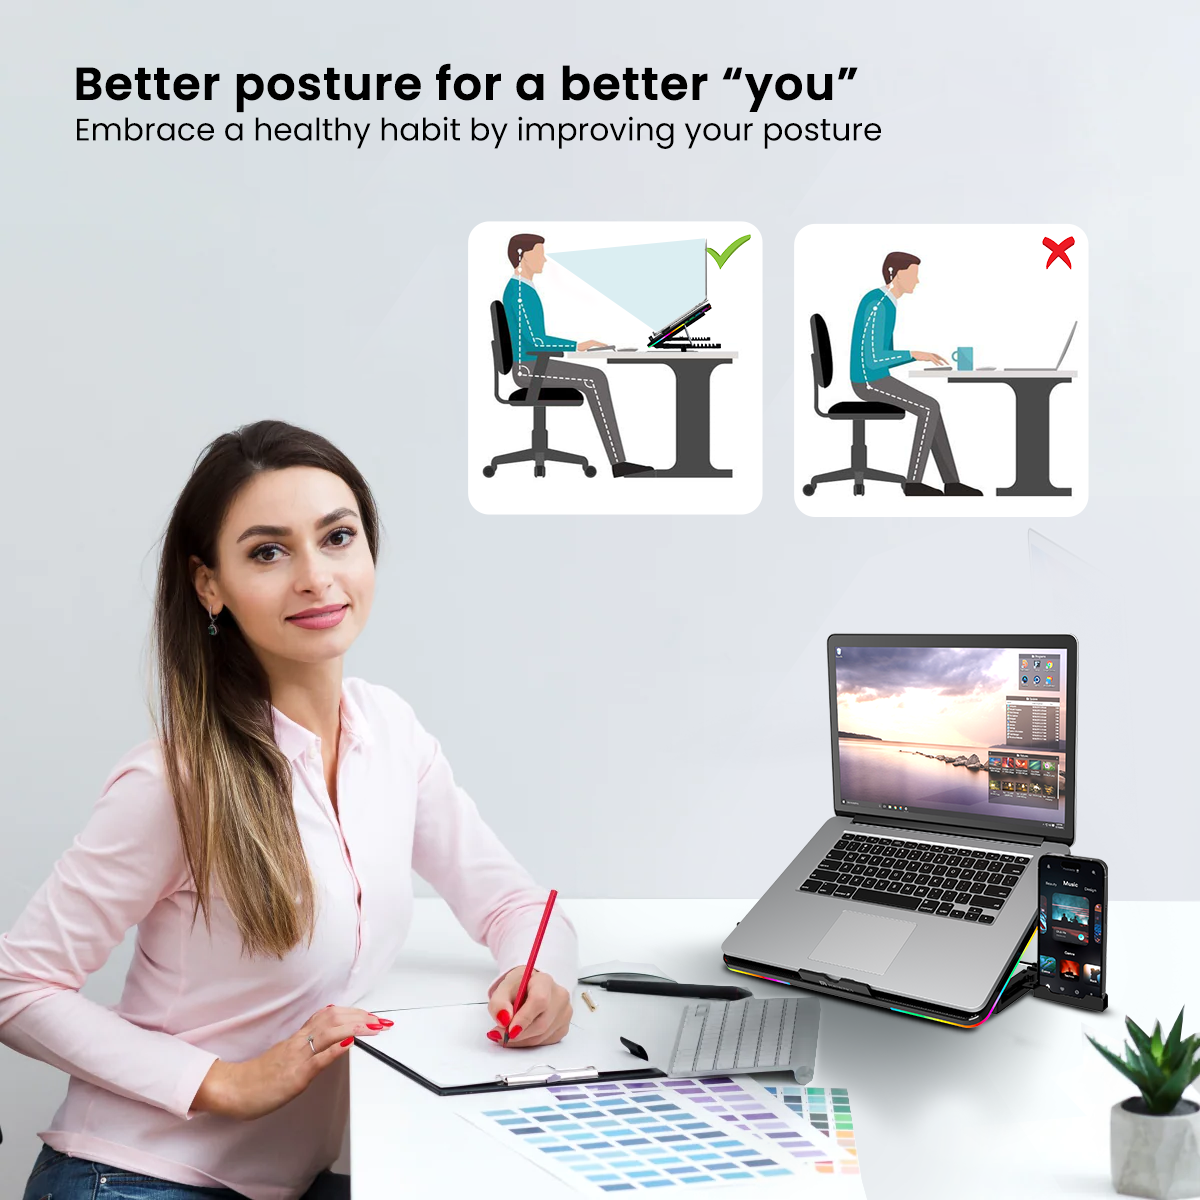 black Portronics My Buddy Air Cooling Pad: Portable Laptop stand For better posture